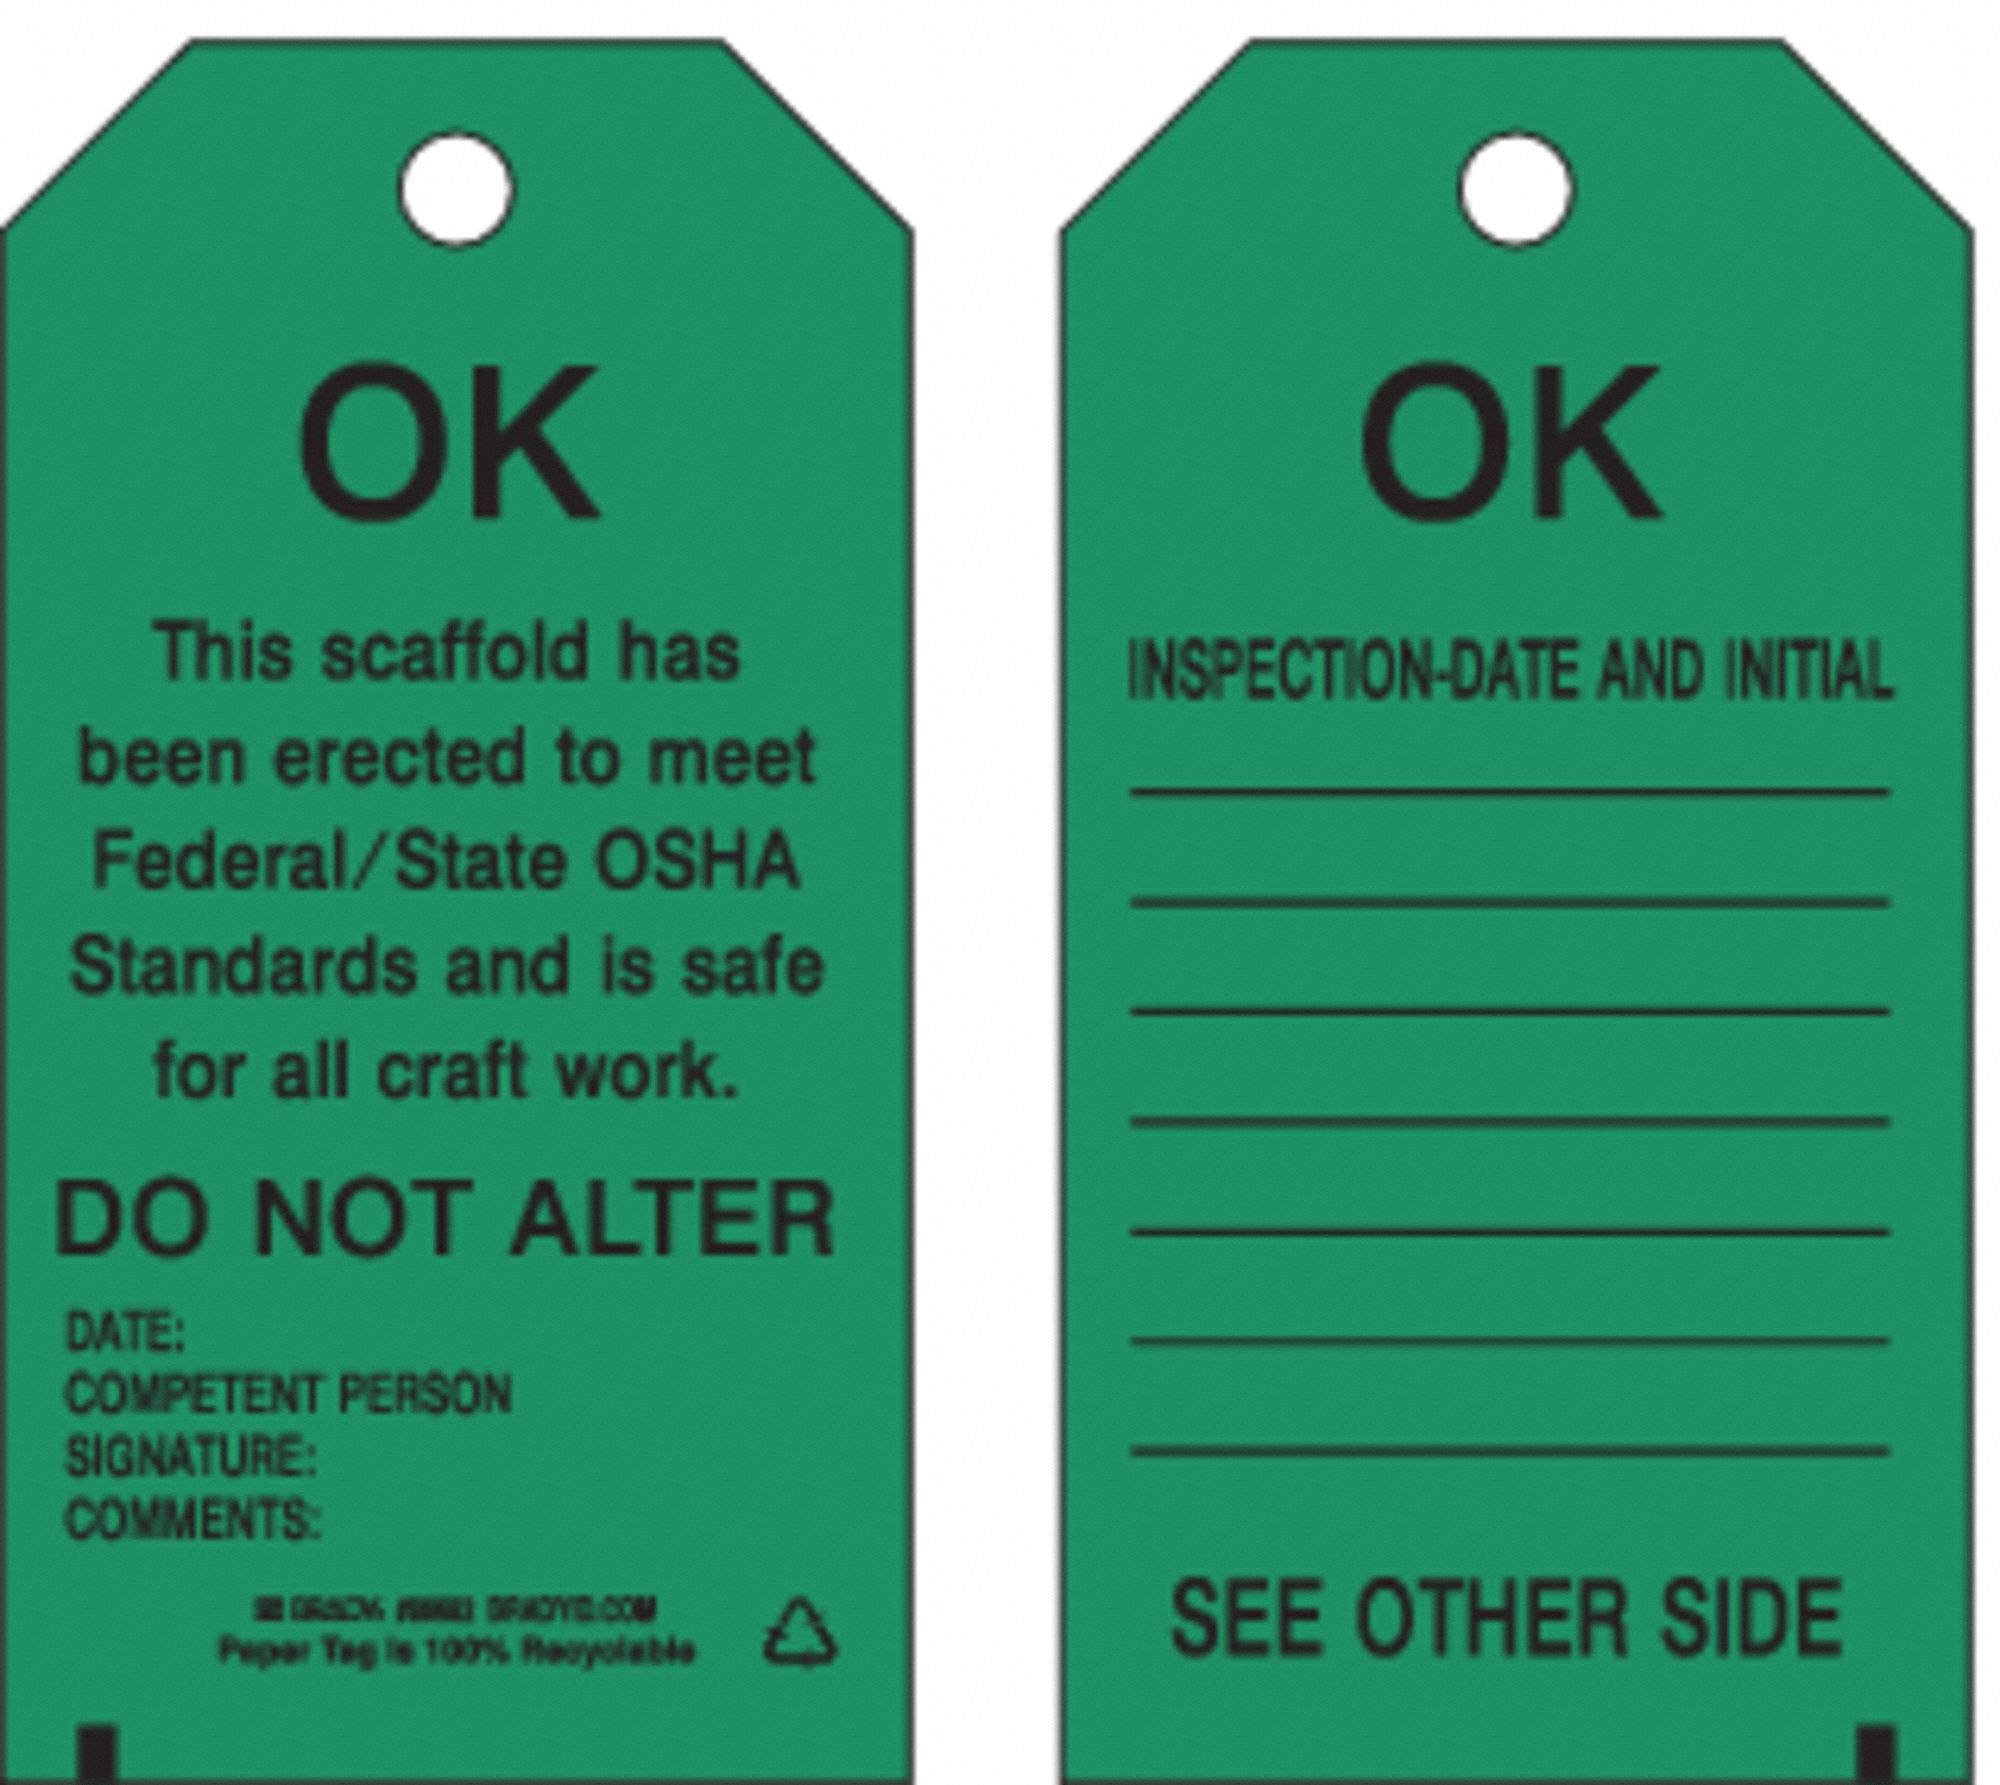 Attention 25 Laminated Pk BRADY Lockout Tags Green W/zip Ties Grommeted 